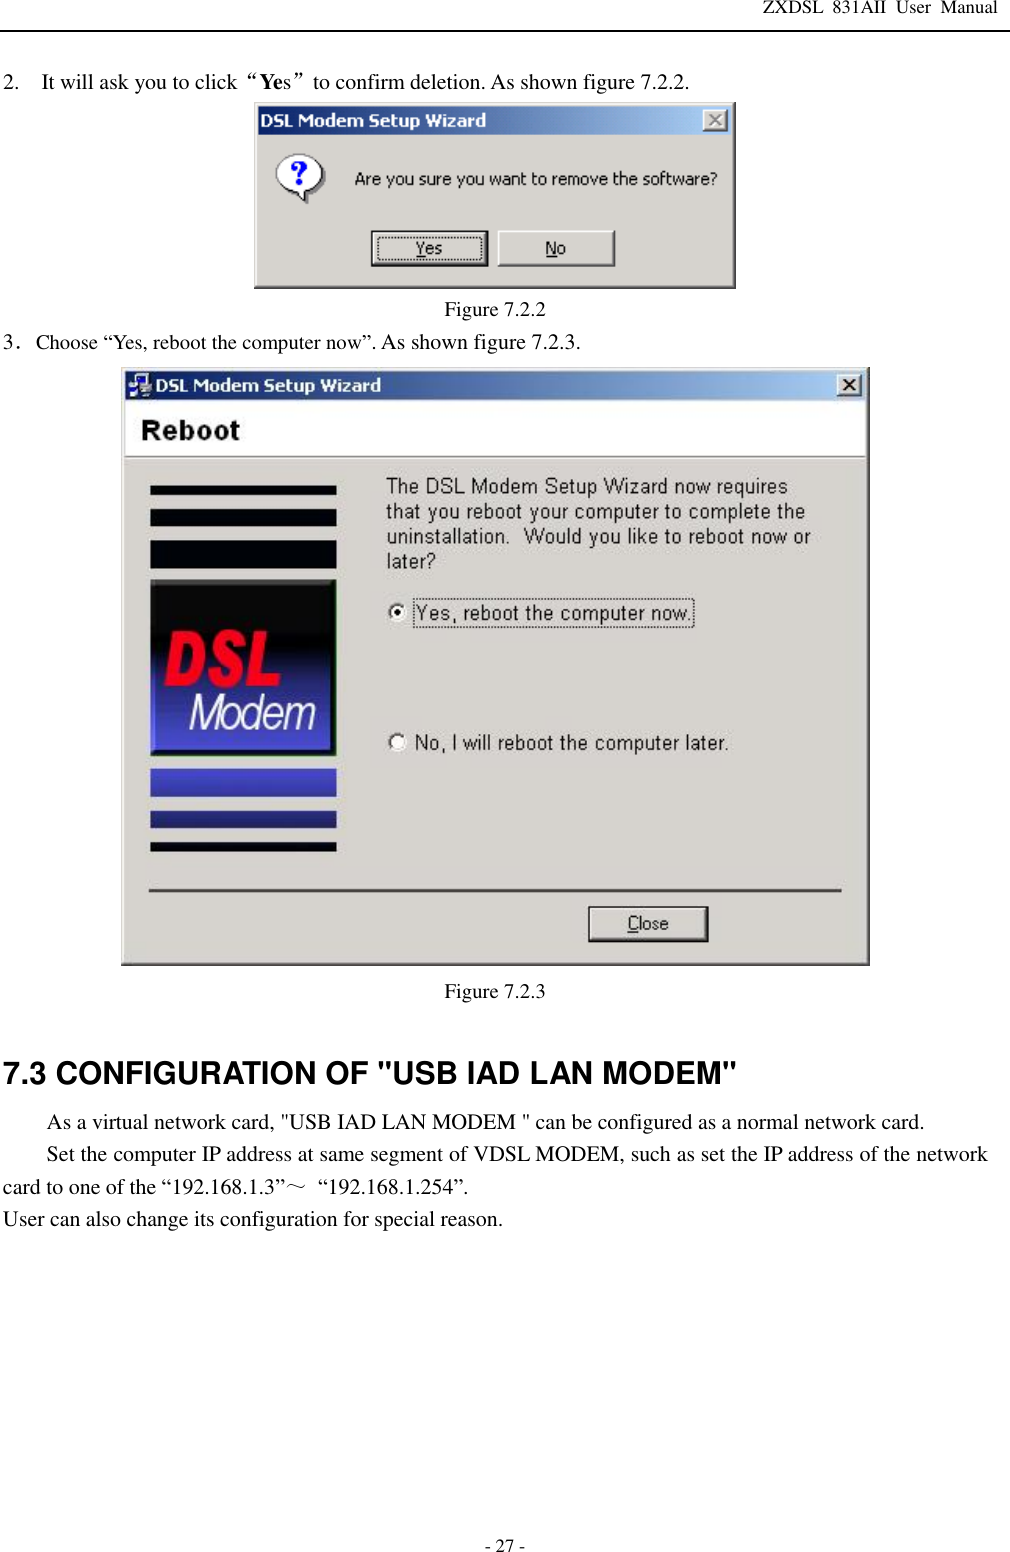 ZXDSL 831AII User Manual  - 27 - 2.  It will ask you to click“Yes” to confirm deletion. As shown figure 7.2.2.  Figure 7.2.2 3．Choose “Yes, reboot the computer now”. As shown figure 7.2.3.  Figure 7.2.3  7.3 CONFIGURATION OF &quot;USB IAD LAN MODEM&quot; As a virtual network card, &quot;USB IAD LAN MODEM &quot; can be configured as a normal network card. Set the computer IP address at same segment of VDSL MODEM, such as set the IP address of the network card to one of the “192.168.1.3”～ “192.168.1.254”. User can also change its configuration for special reason. 